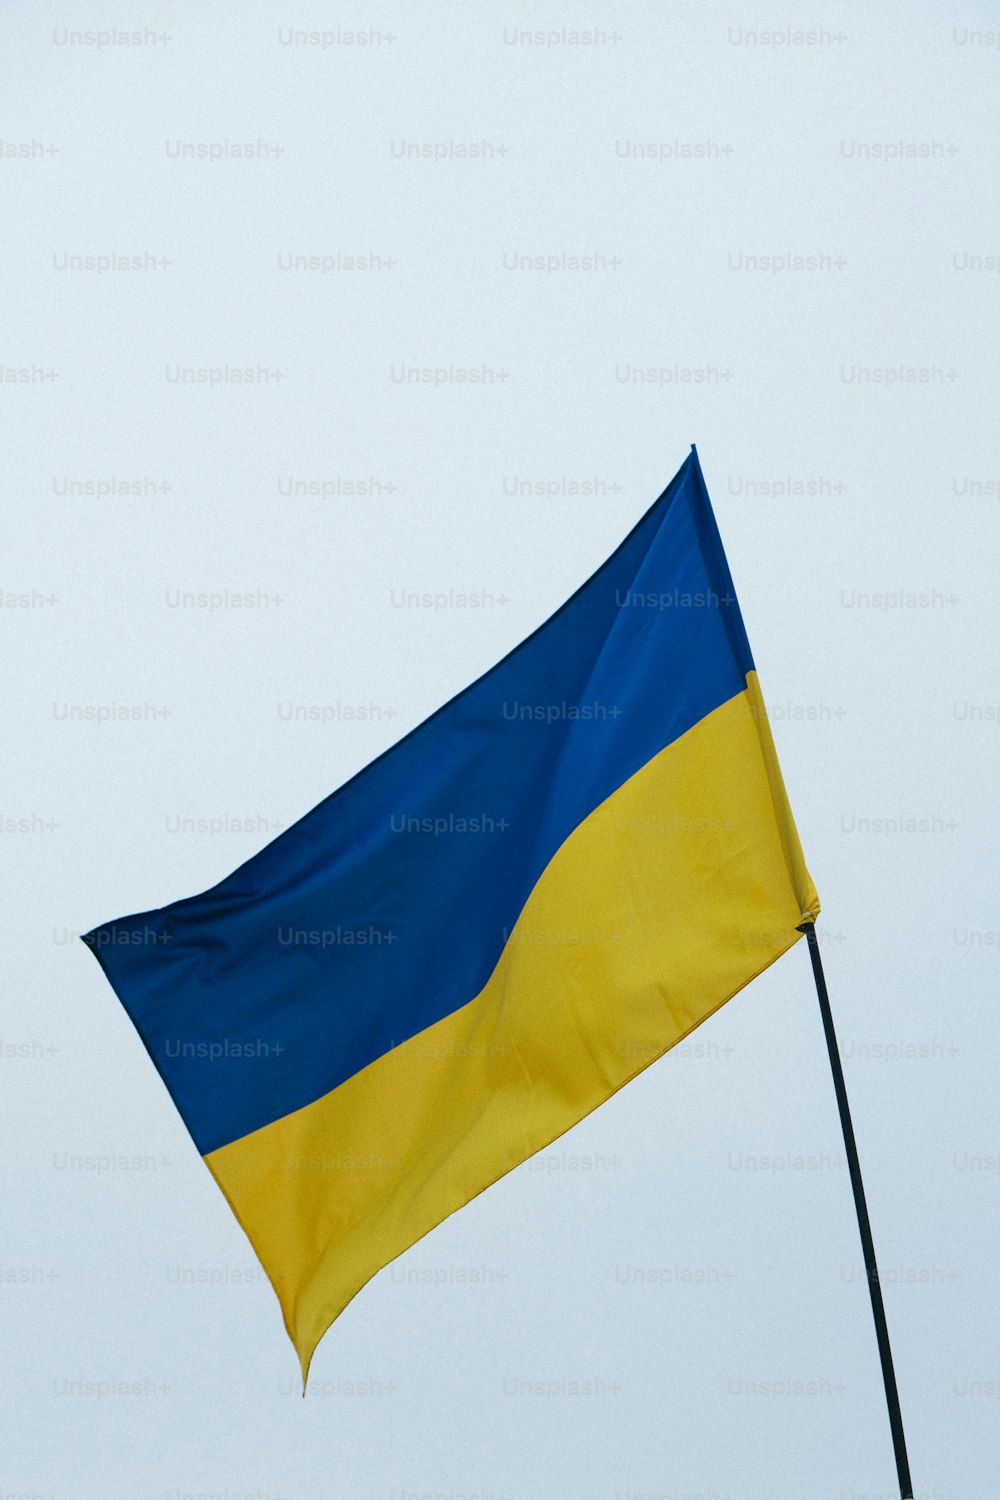 a blue and yellow flag flying in the sky